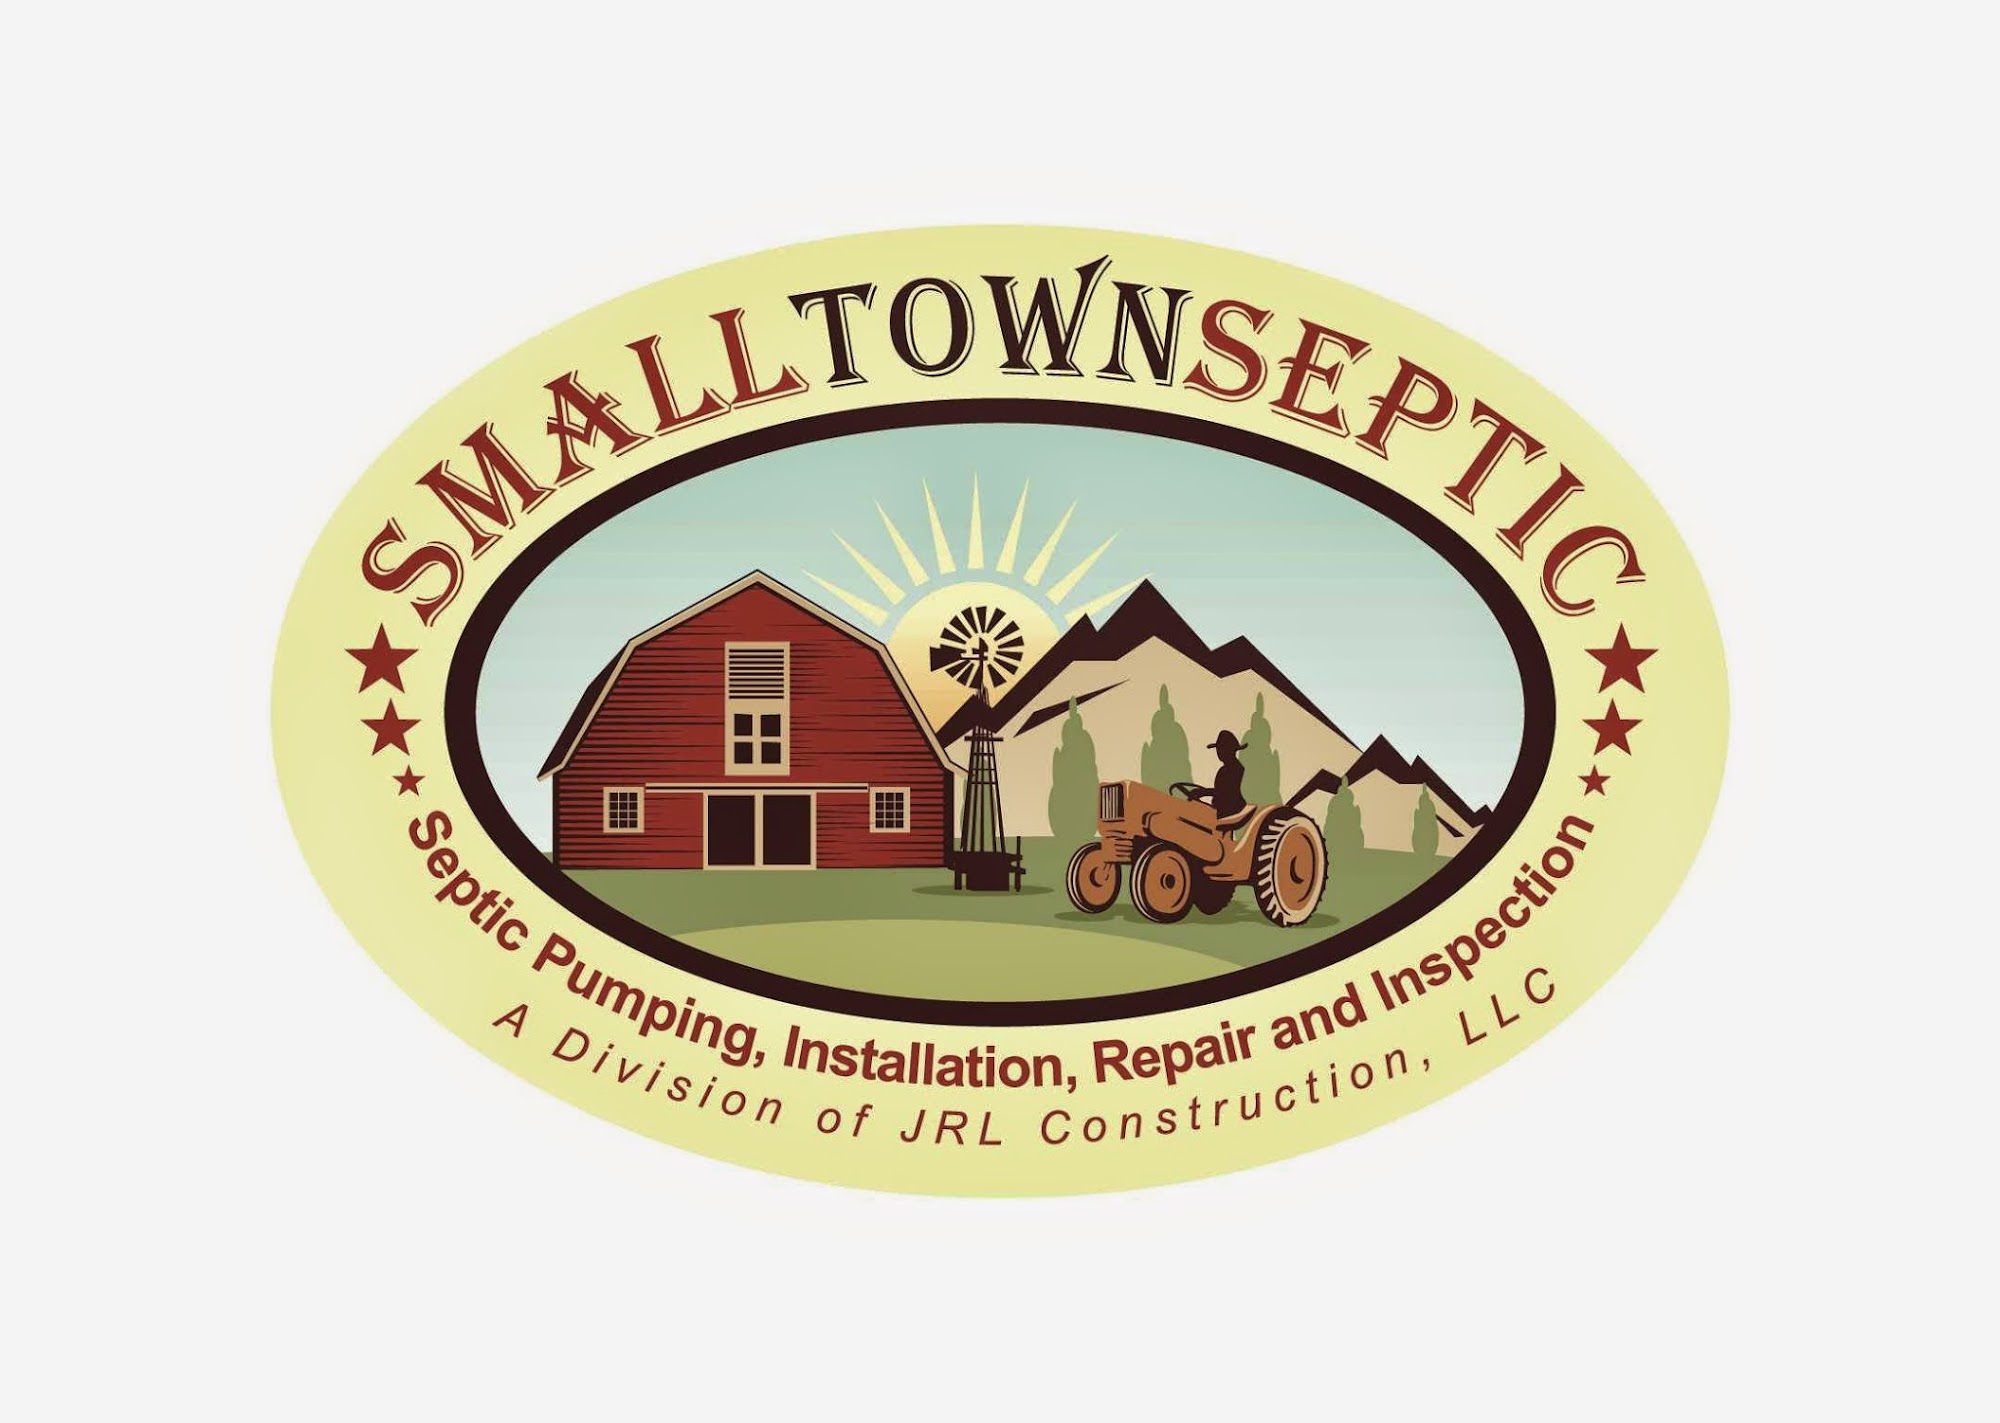 Small Town Septic 566 Salmon Brook St, Granby Connecticut 06035